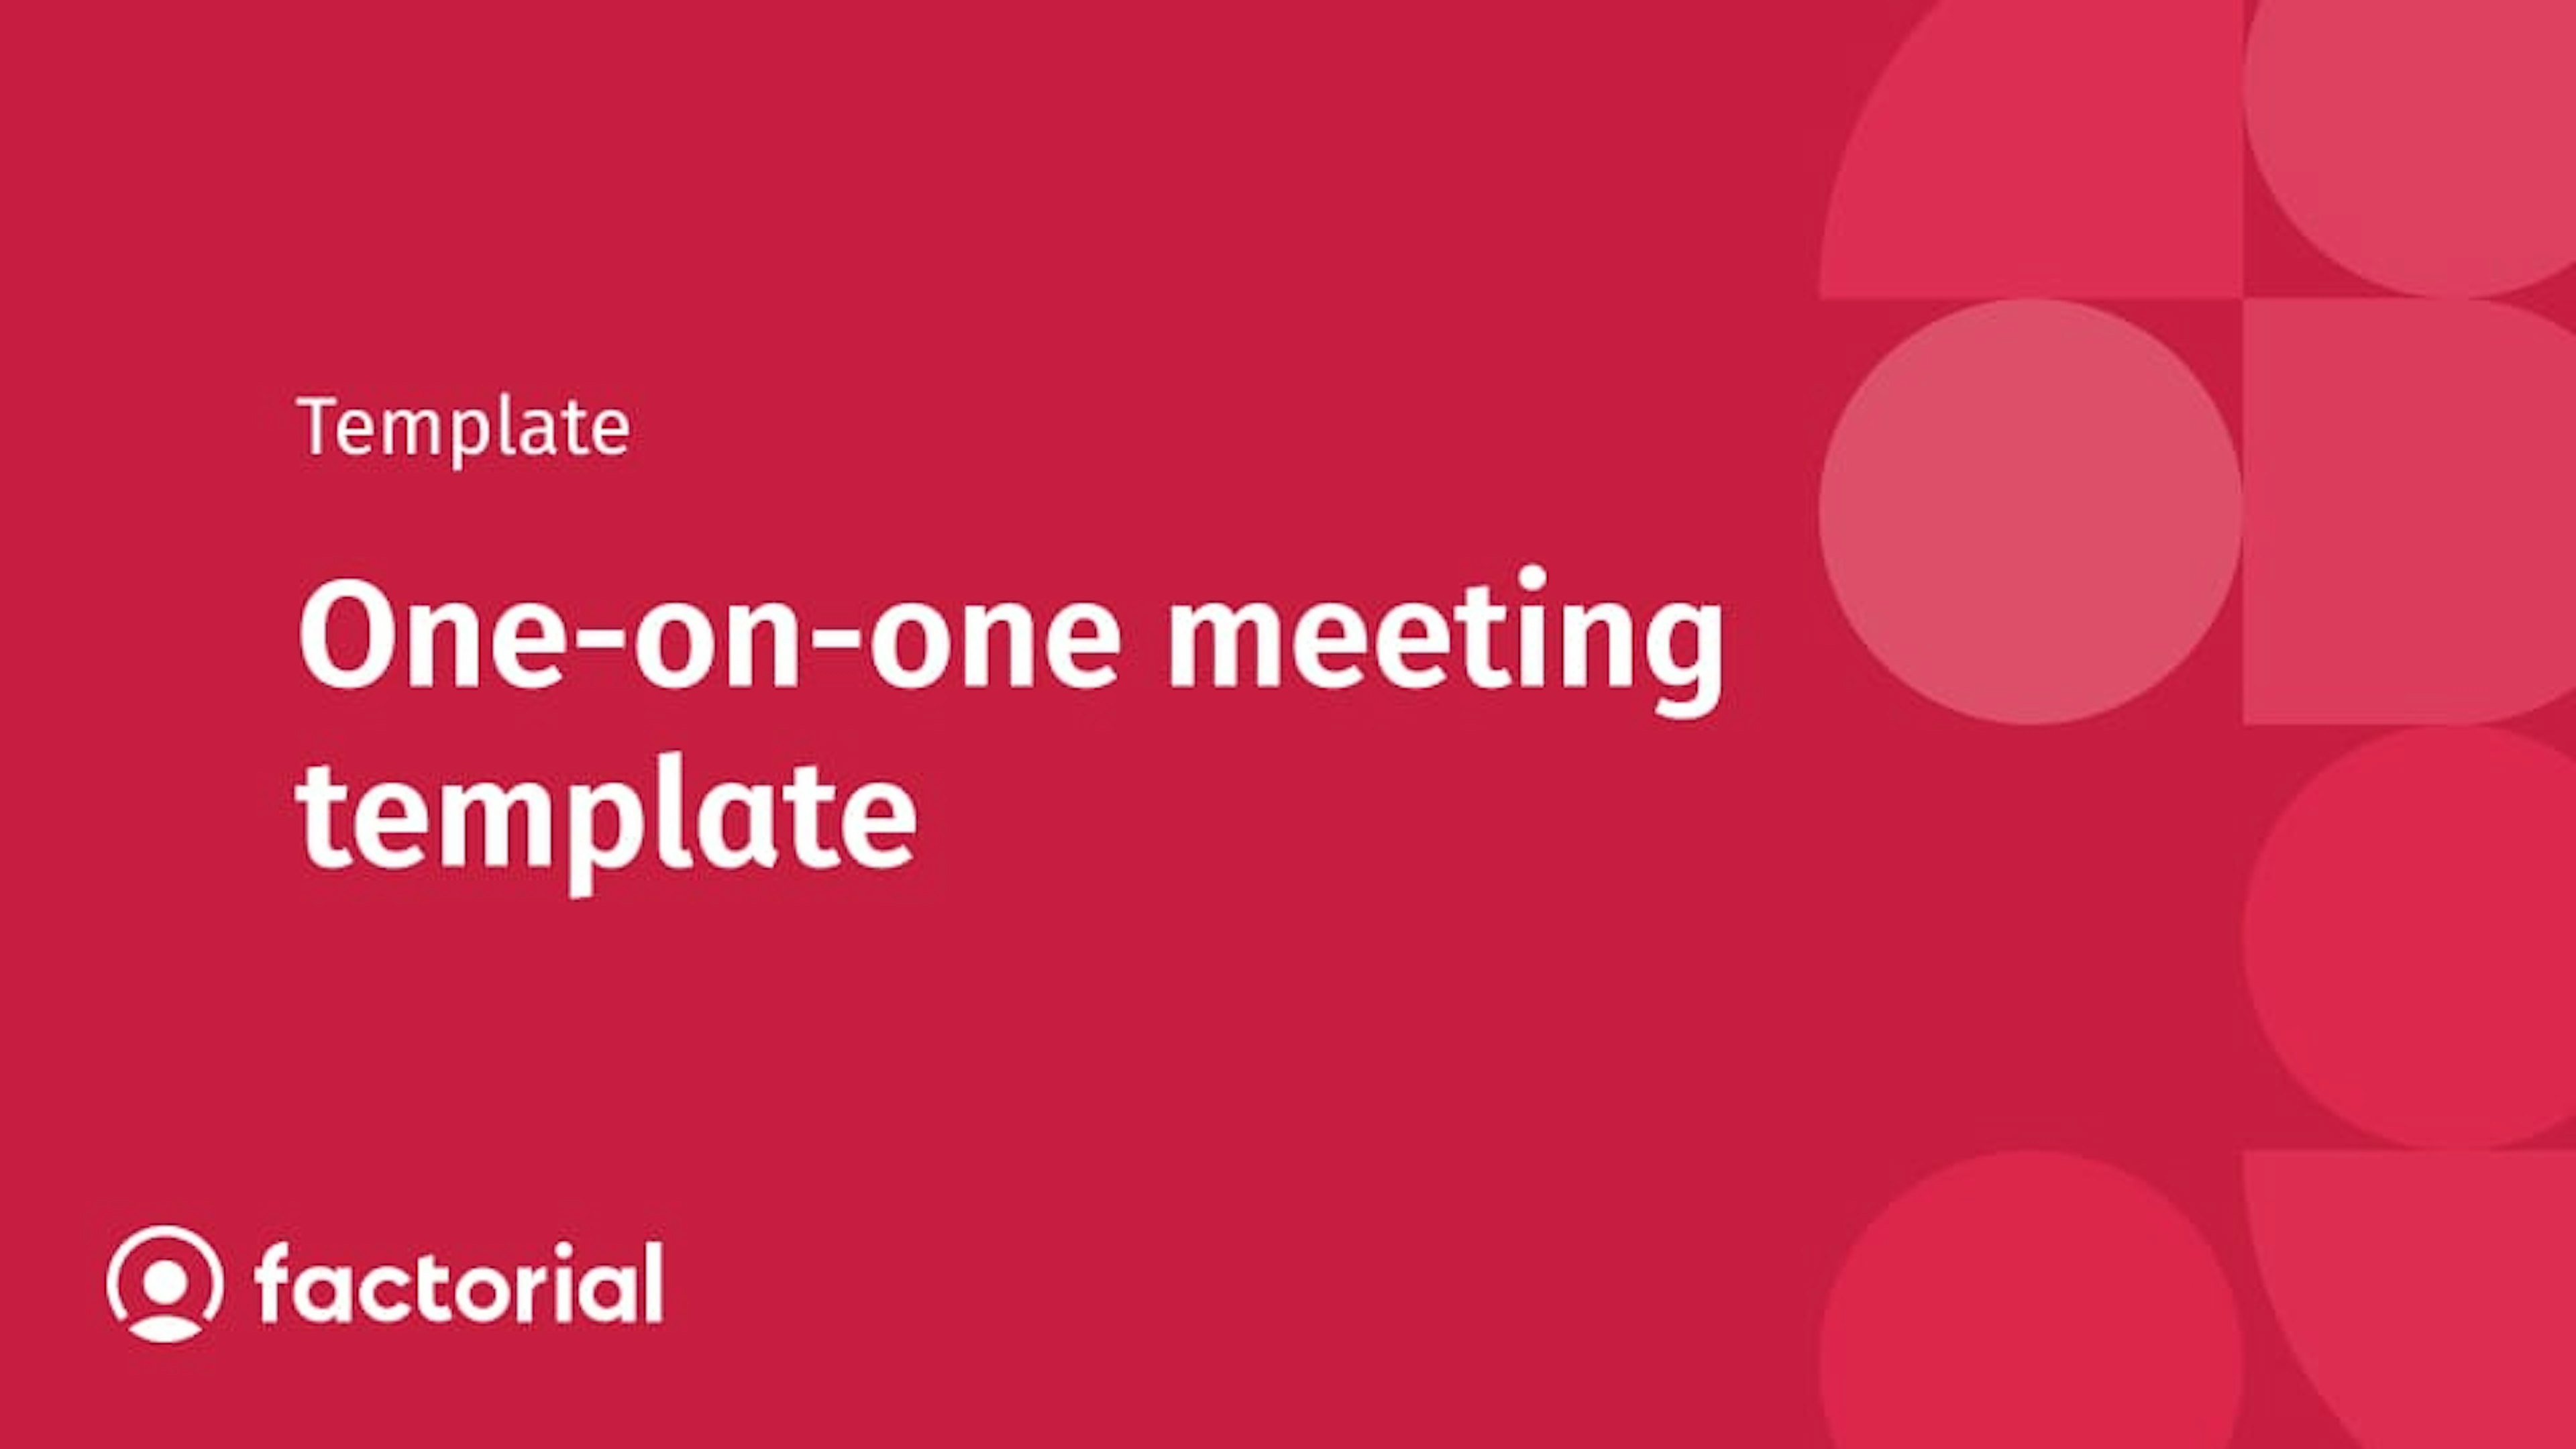 One-on-one meeting template